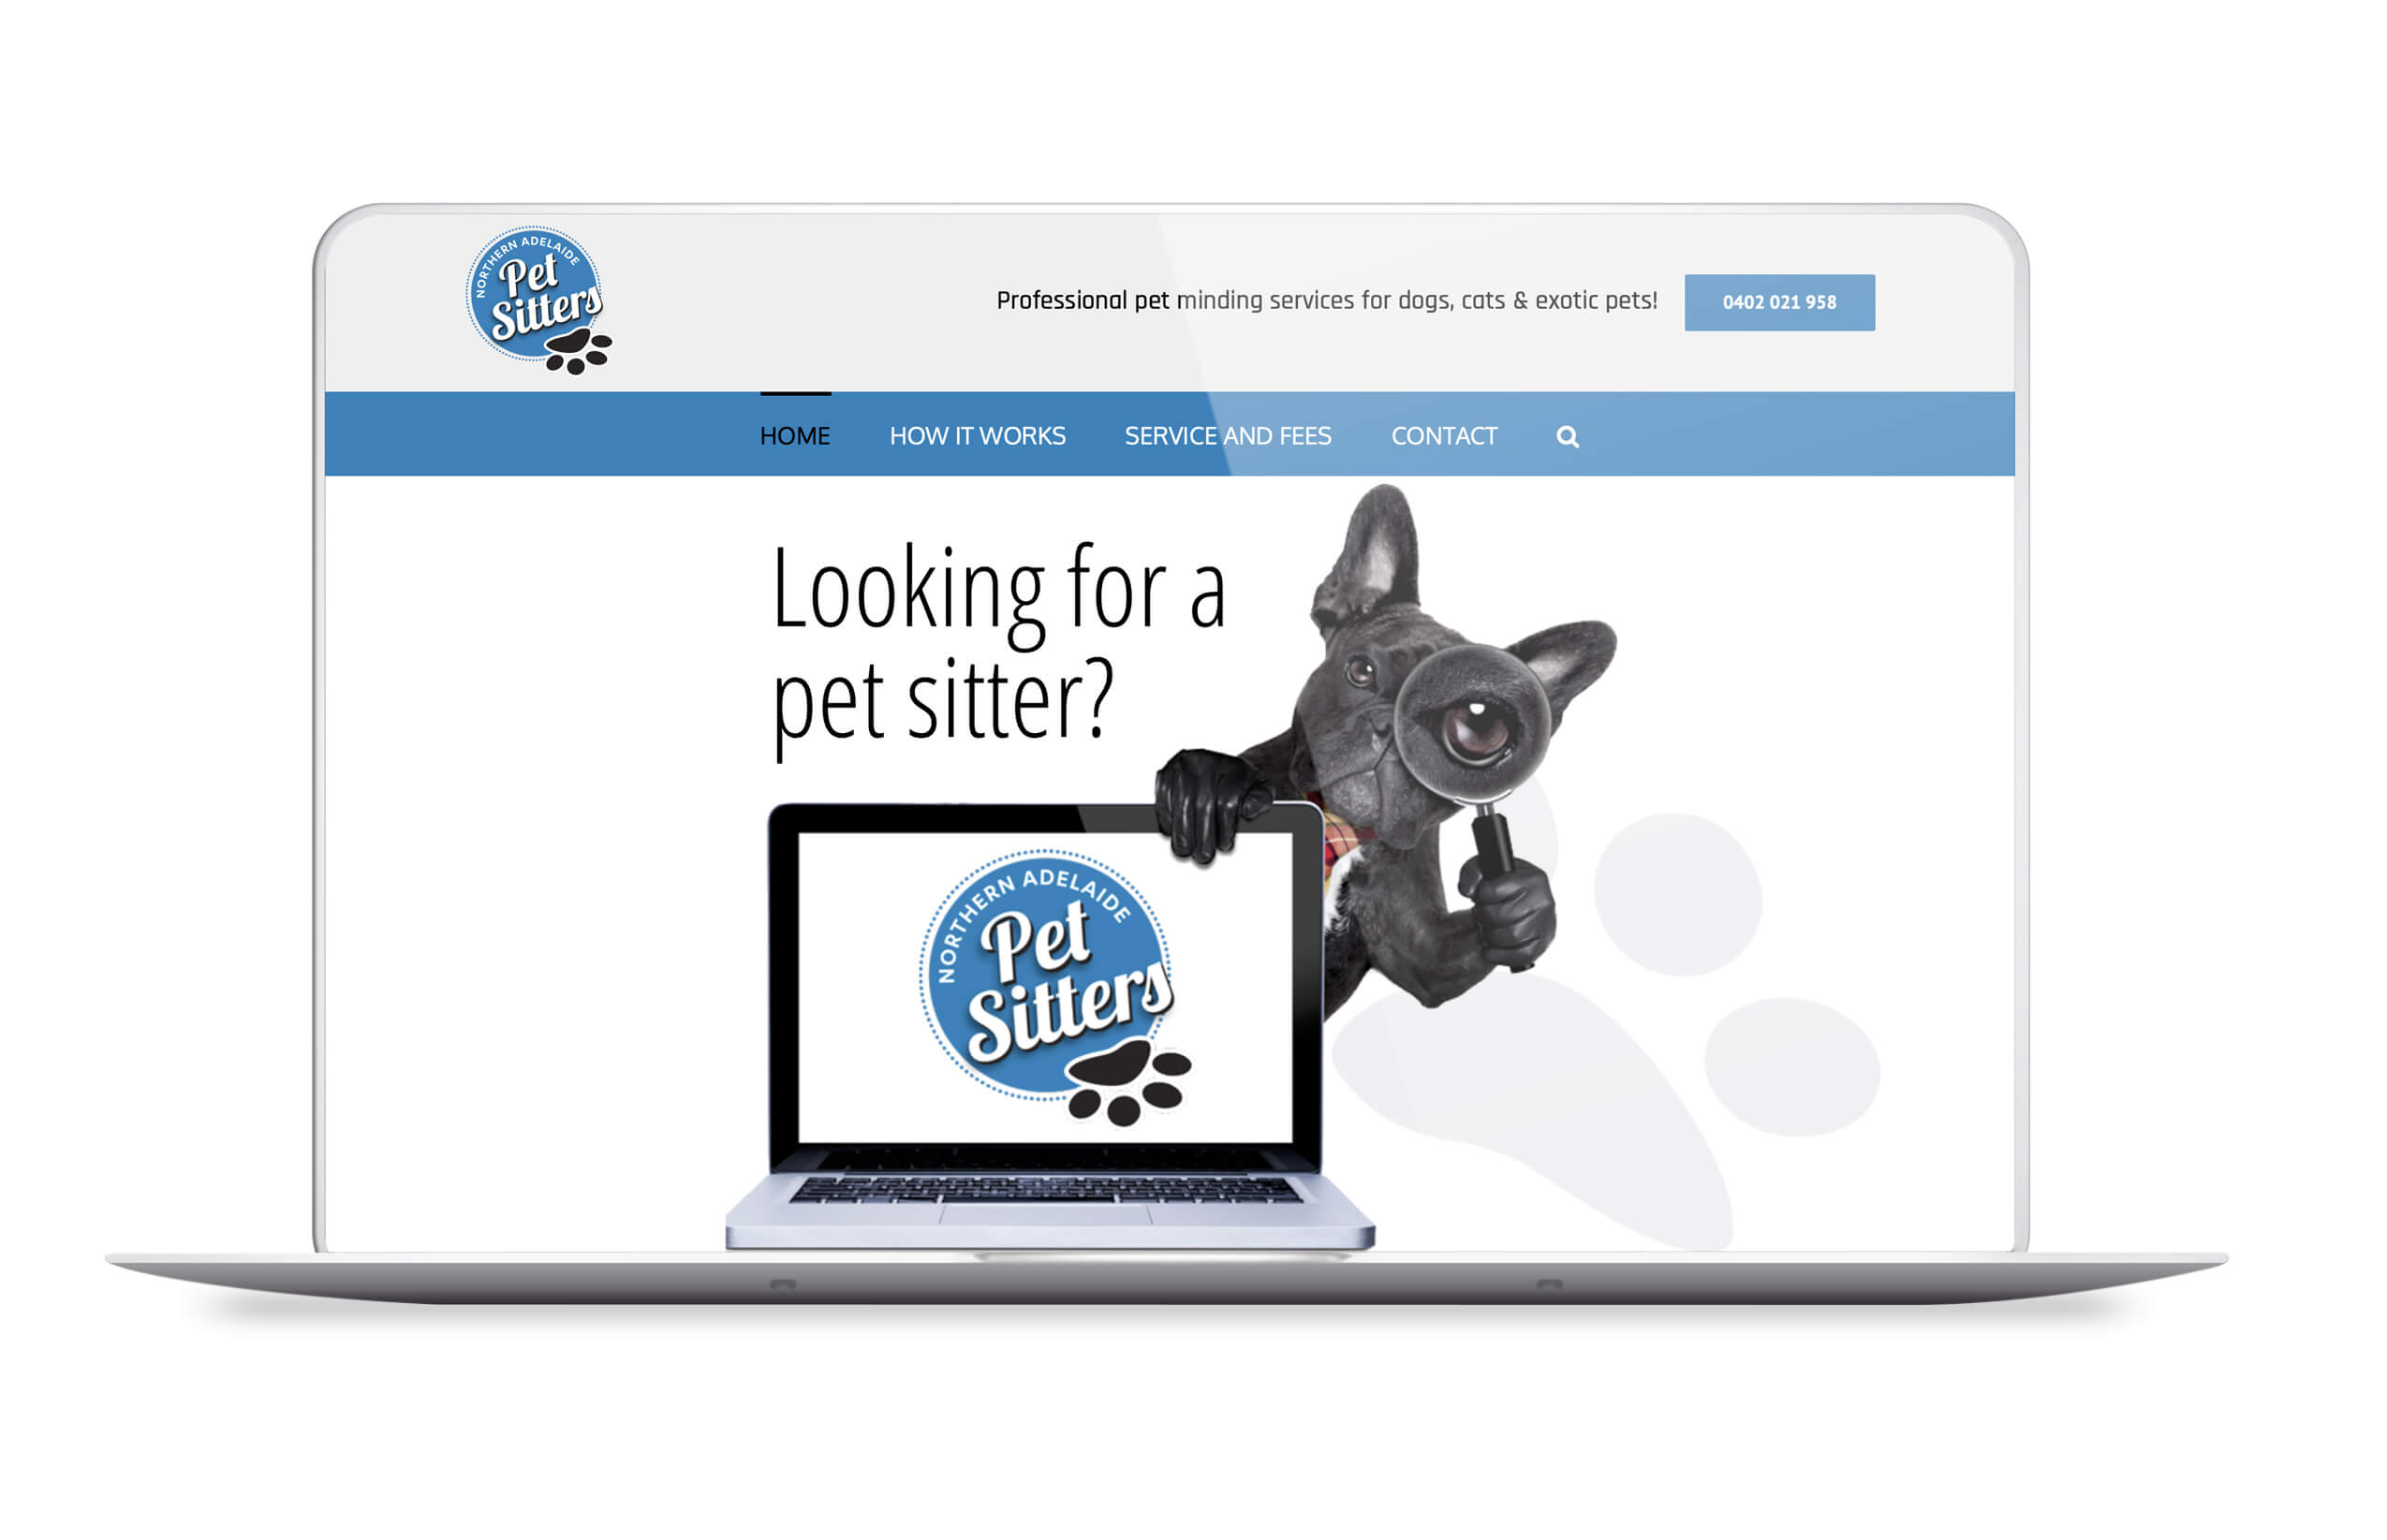 Icon Web Design Adelaide. Image of a Northern Adelaide Pet Sitters webpage displayed on a laptop.